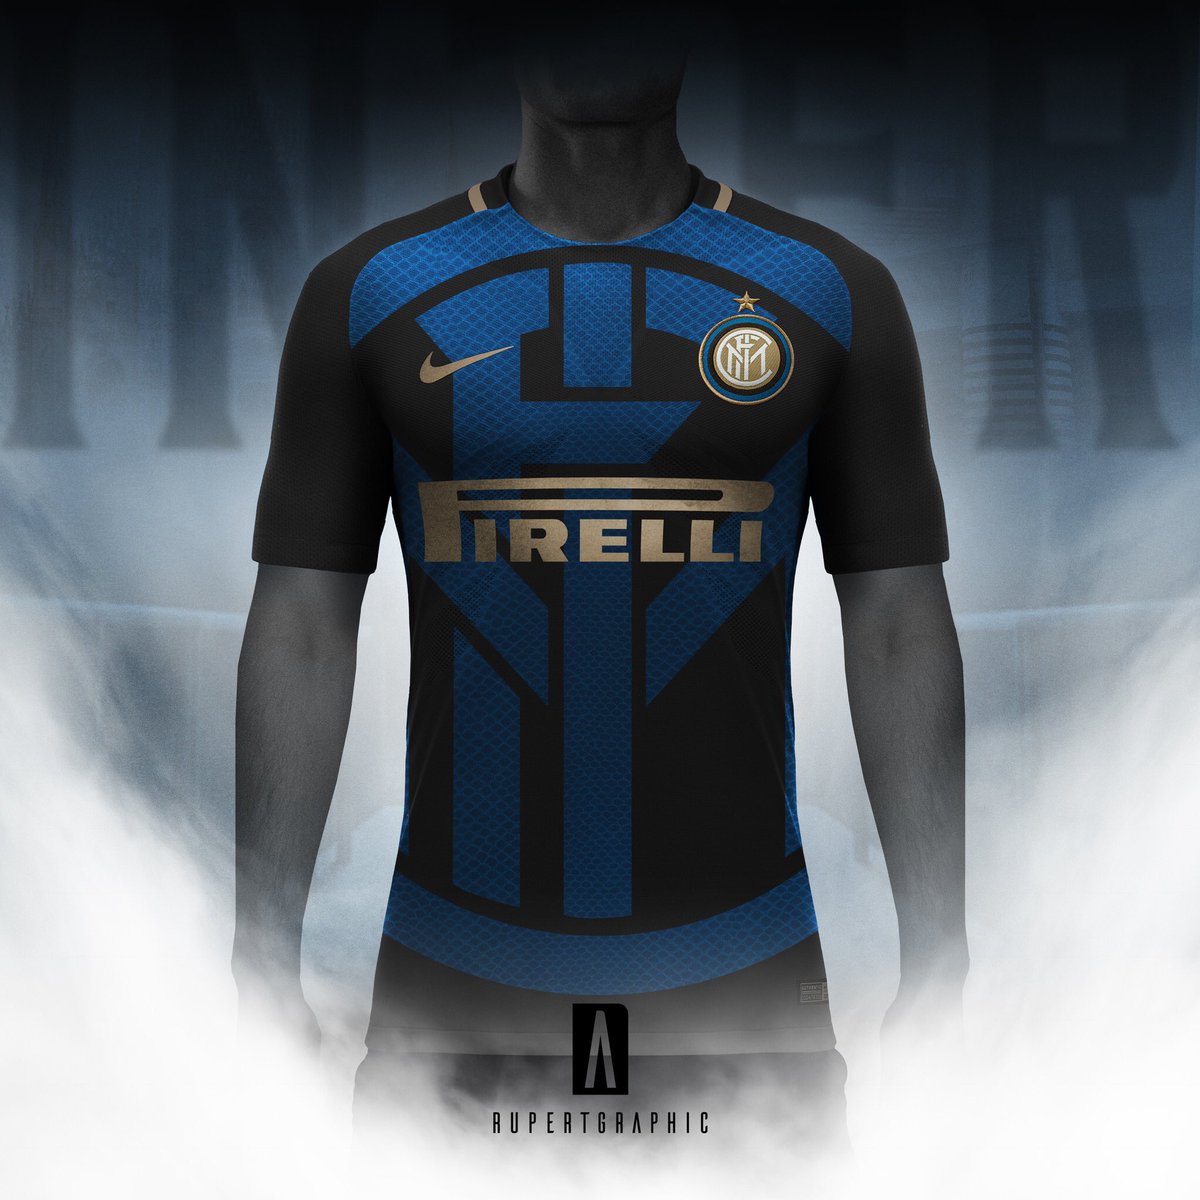 Nike x EA Sports Inter Milan Digital 4th Kit Concept by Rupertgraphic ...